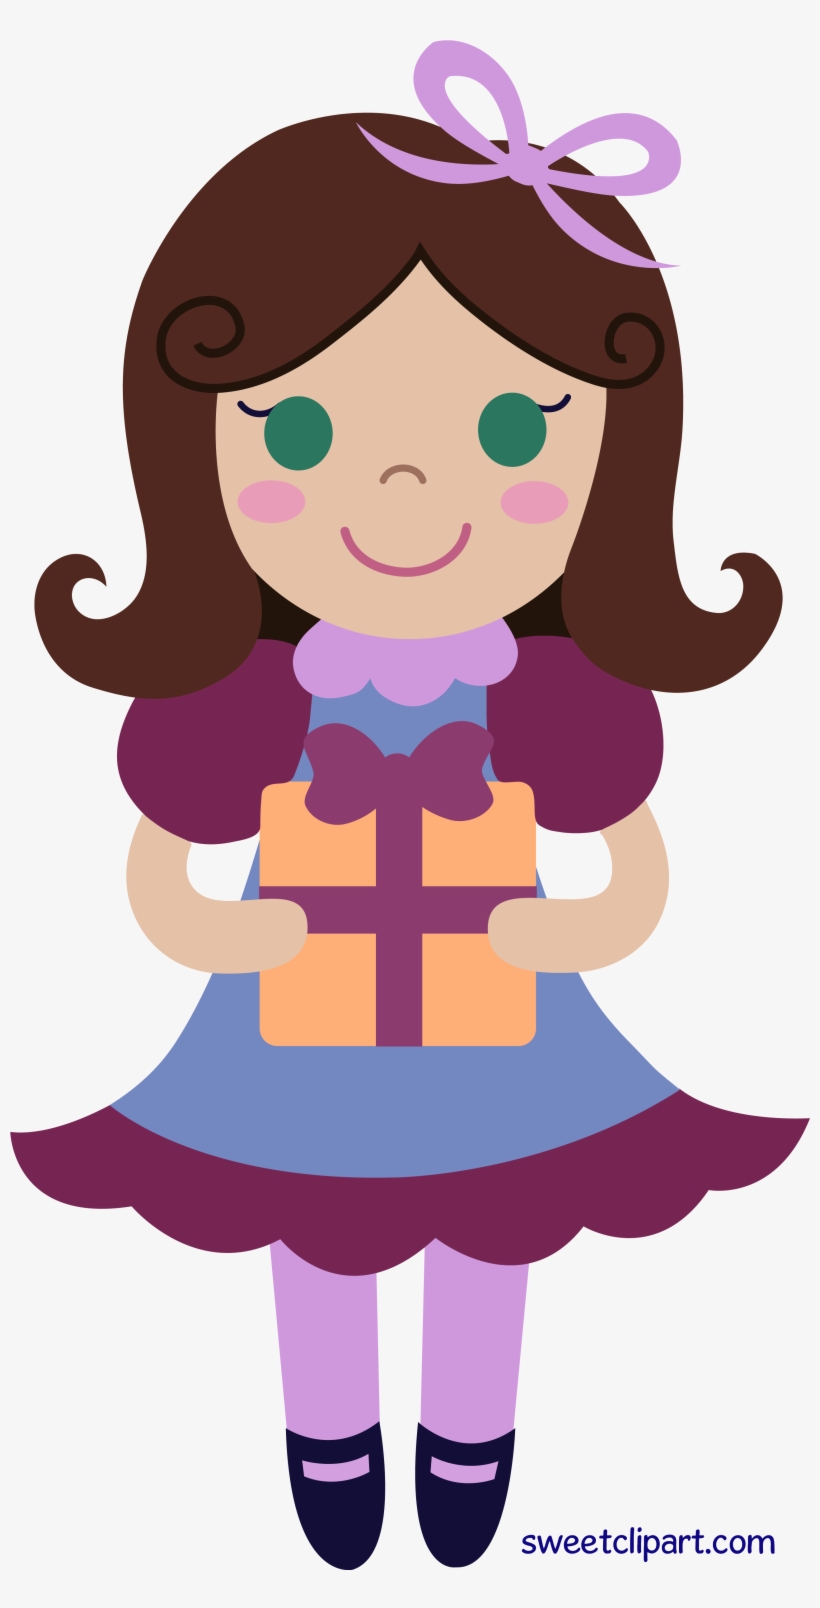 Birthday Girl Clipart At Getdrawings - Birthday Girl Clipart, transparent png #631406